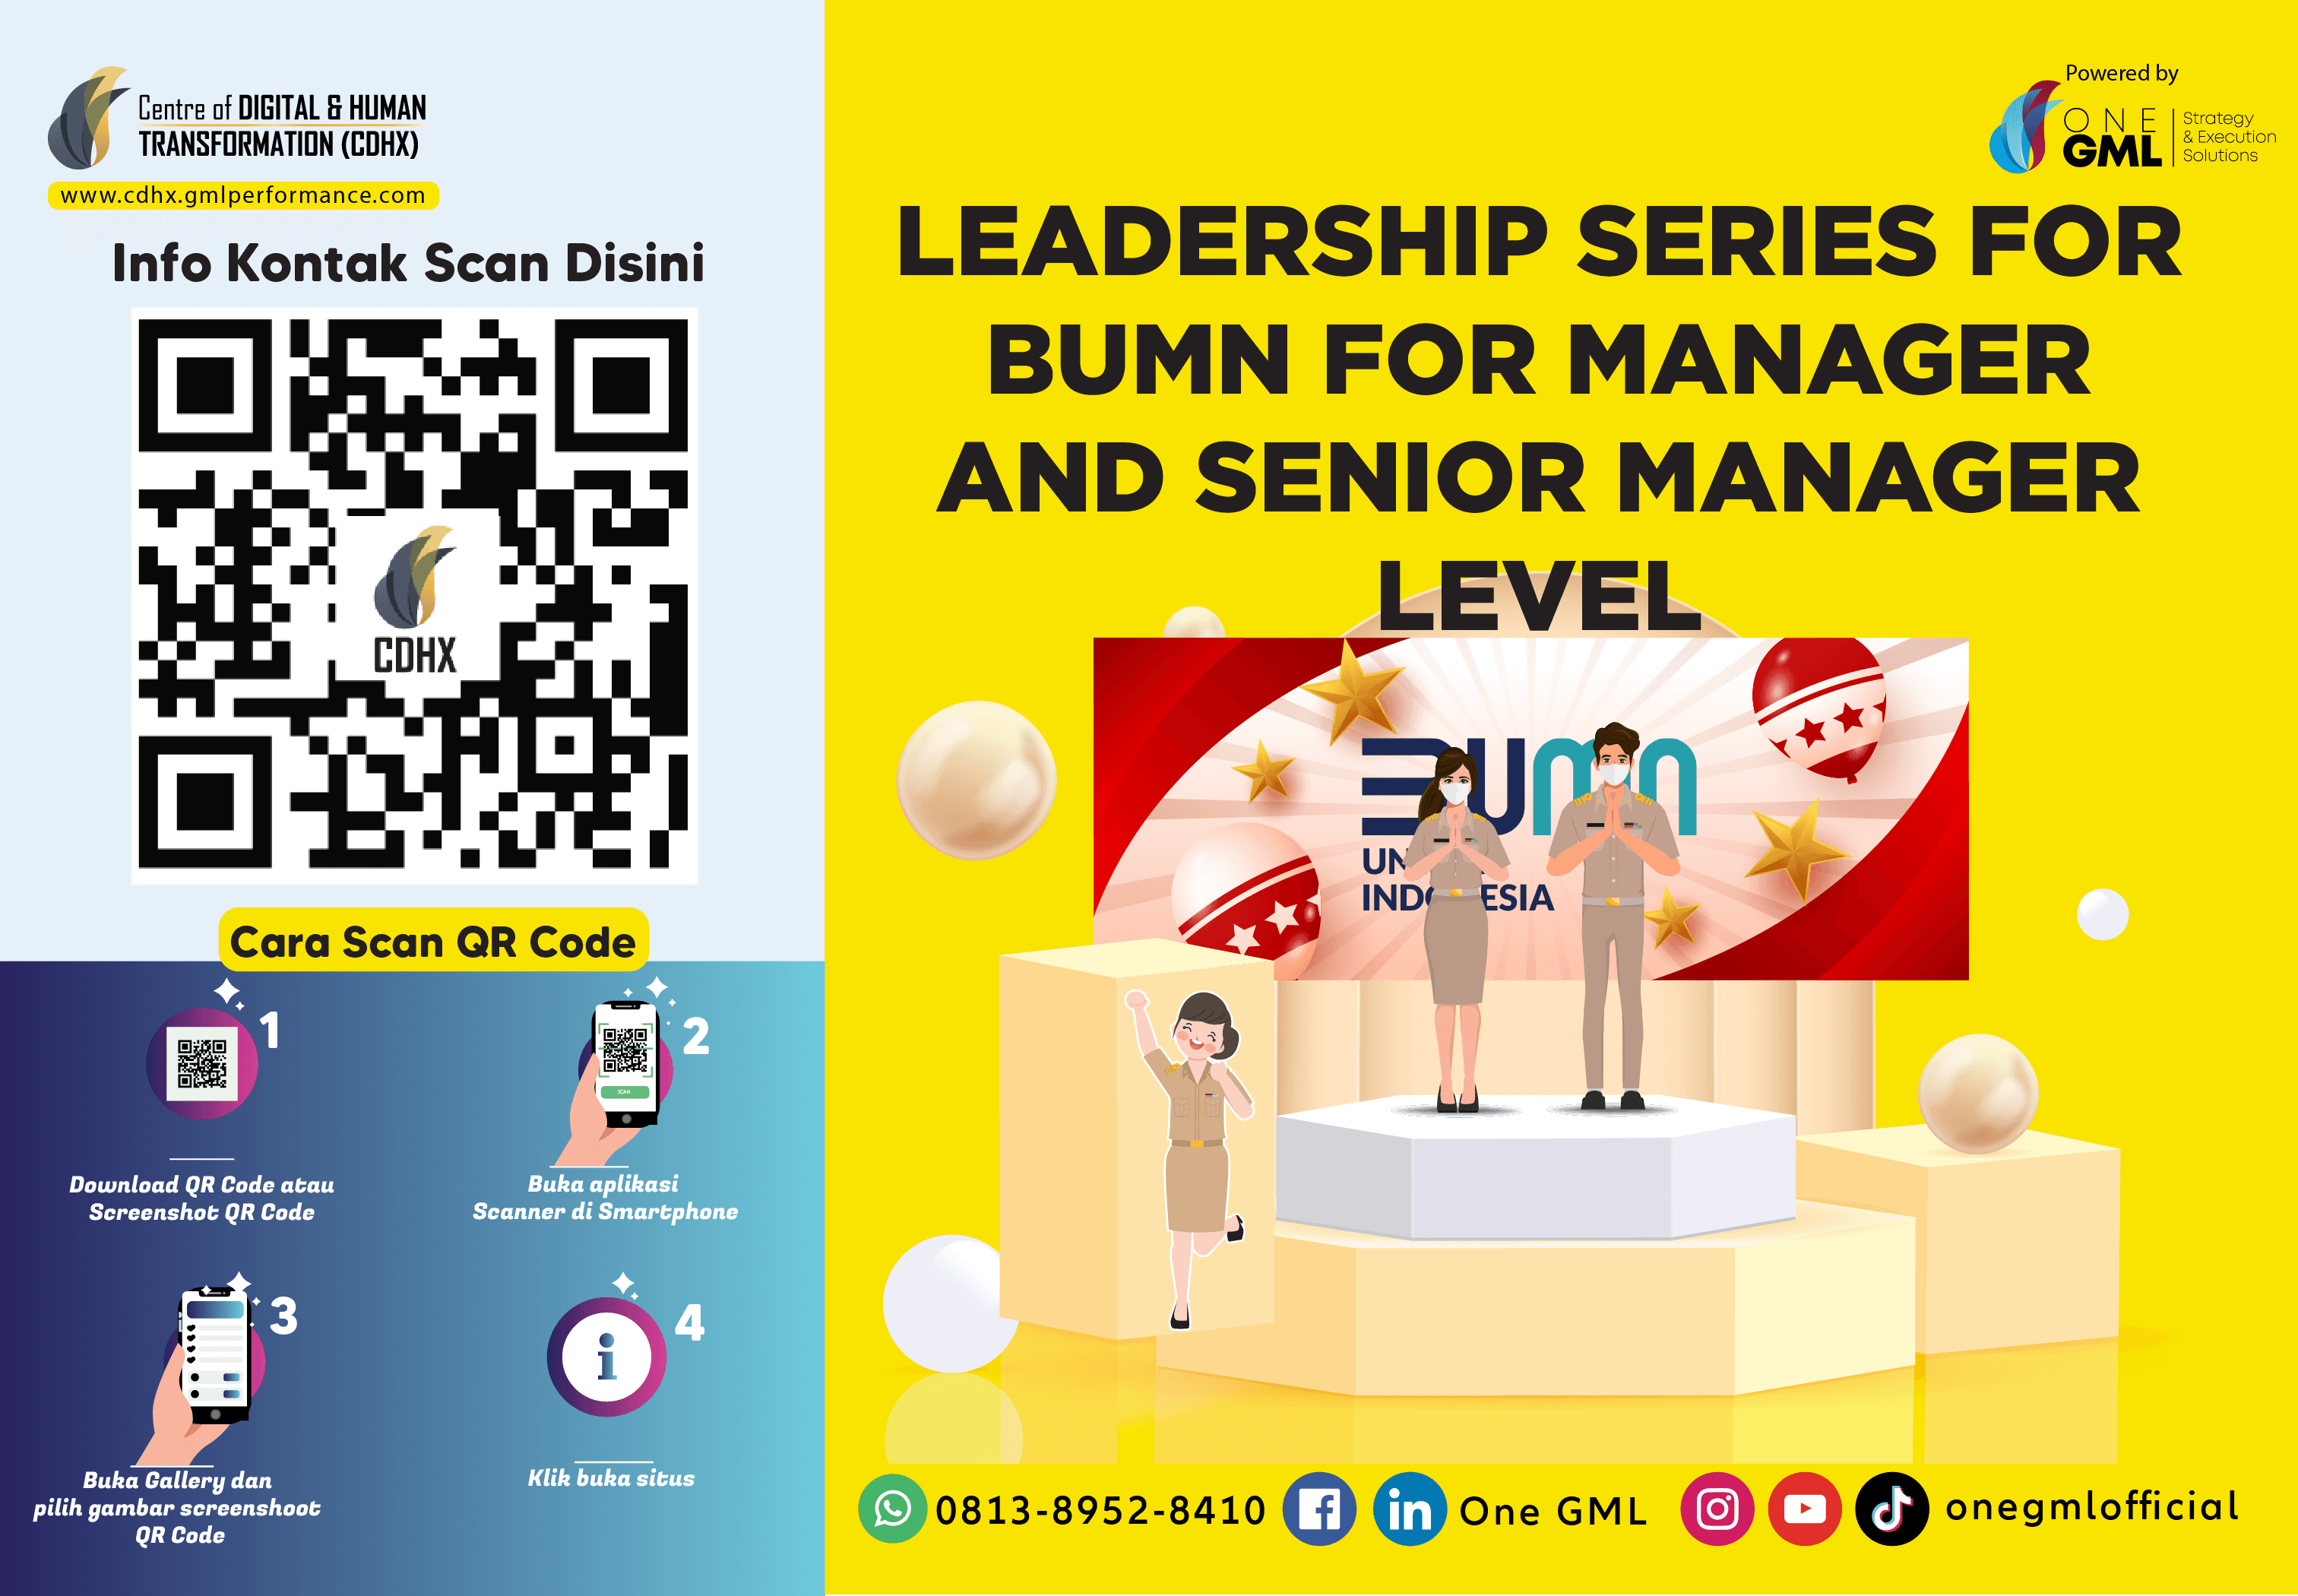 Leadership Series for BUMN for Manager and Senior Manager Level